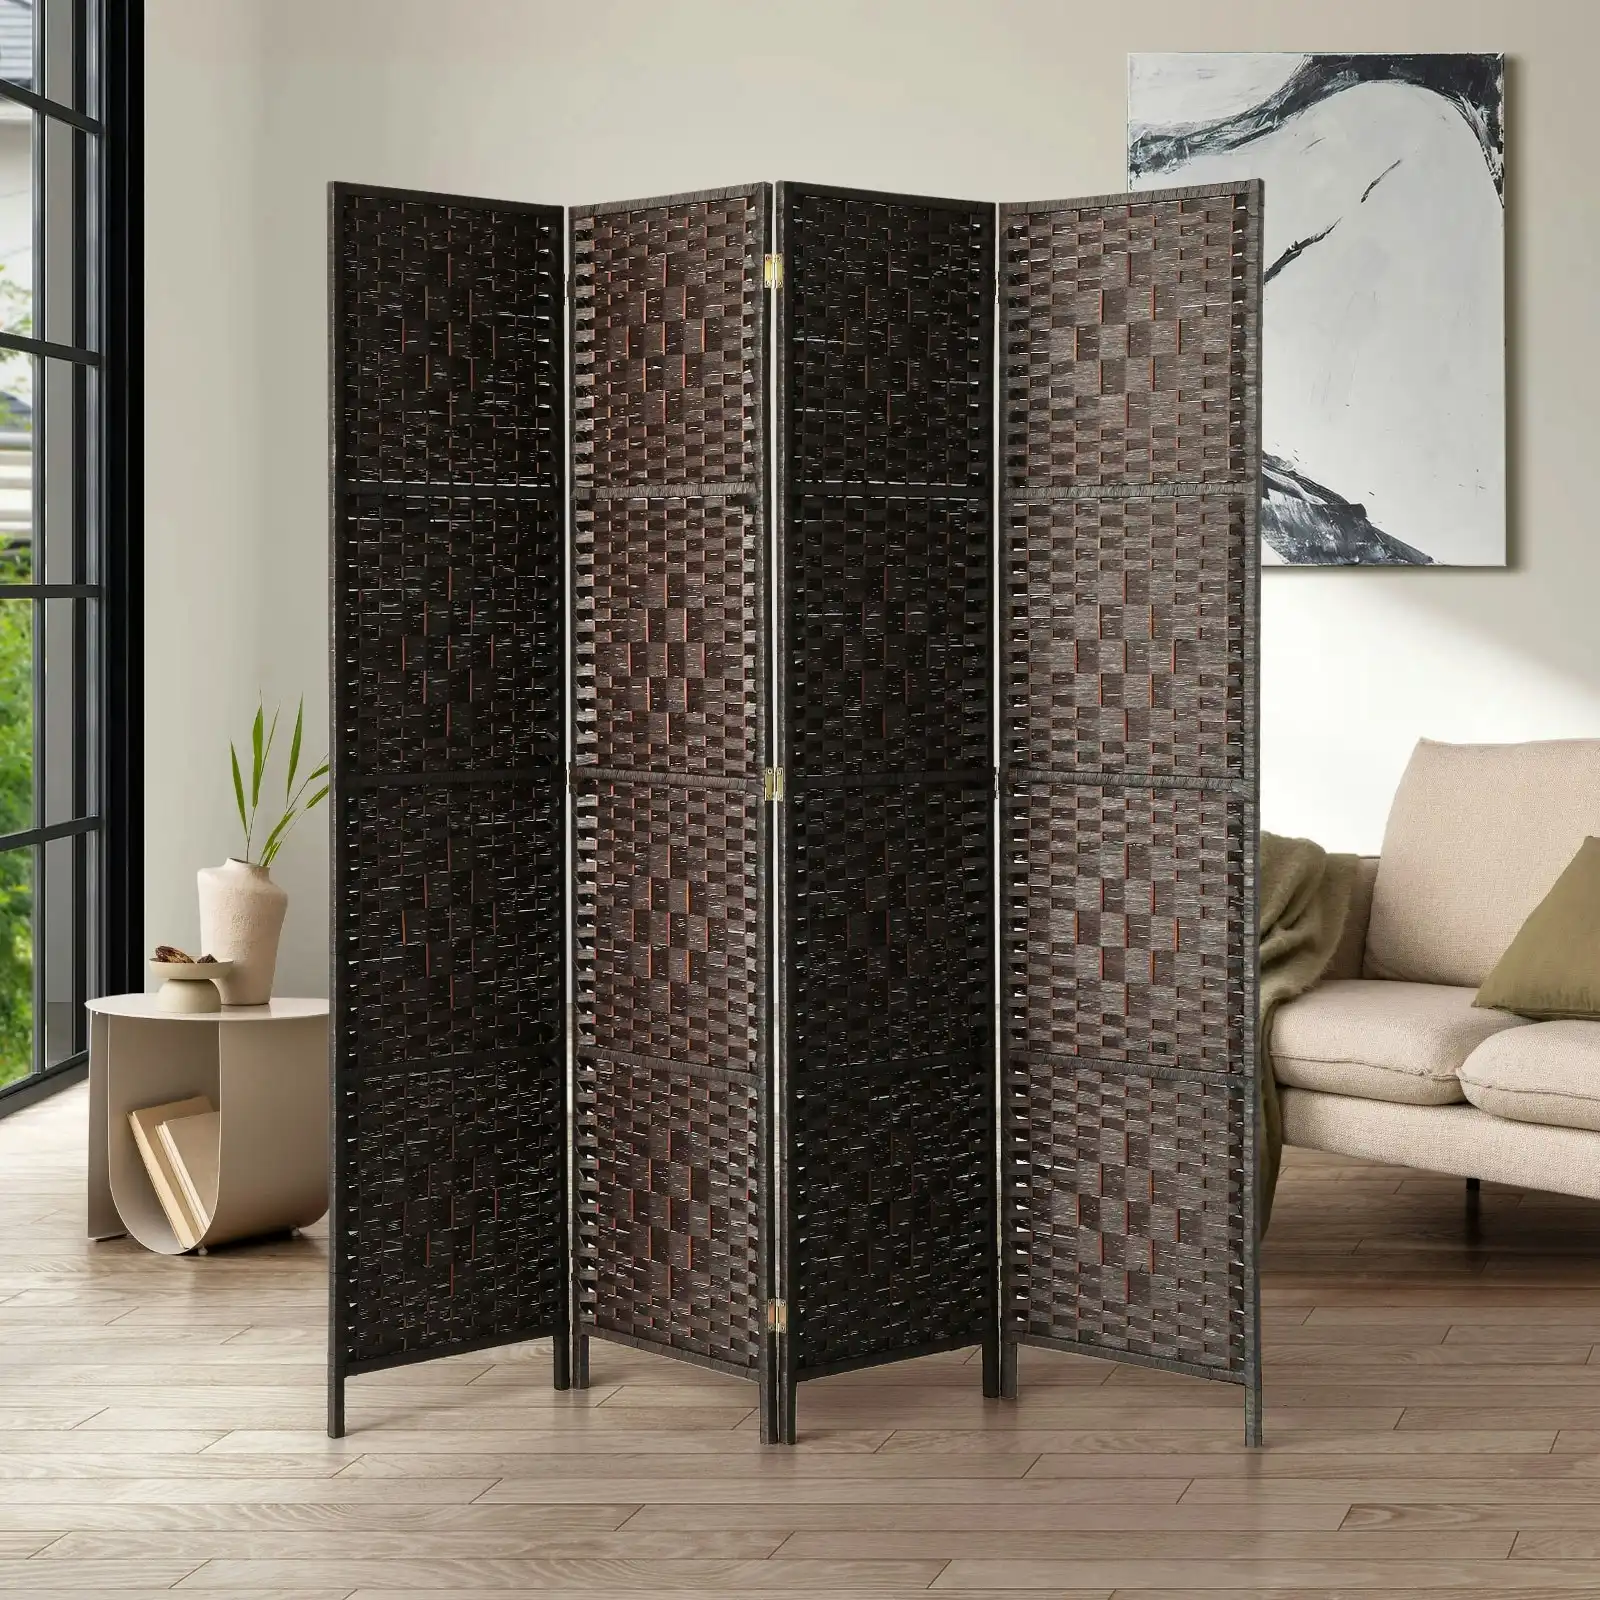 Oikiture 4 Panel Room Divider Screen Privacy Dividers Woven Wood Folding Brown